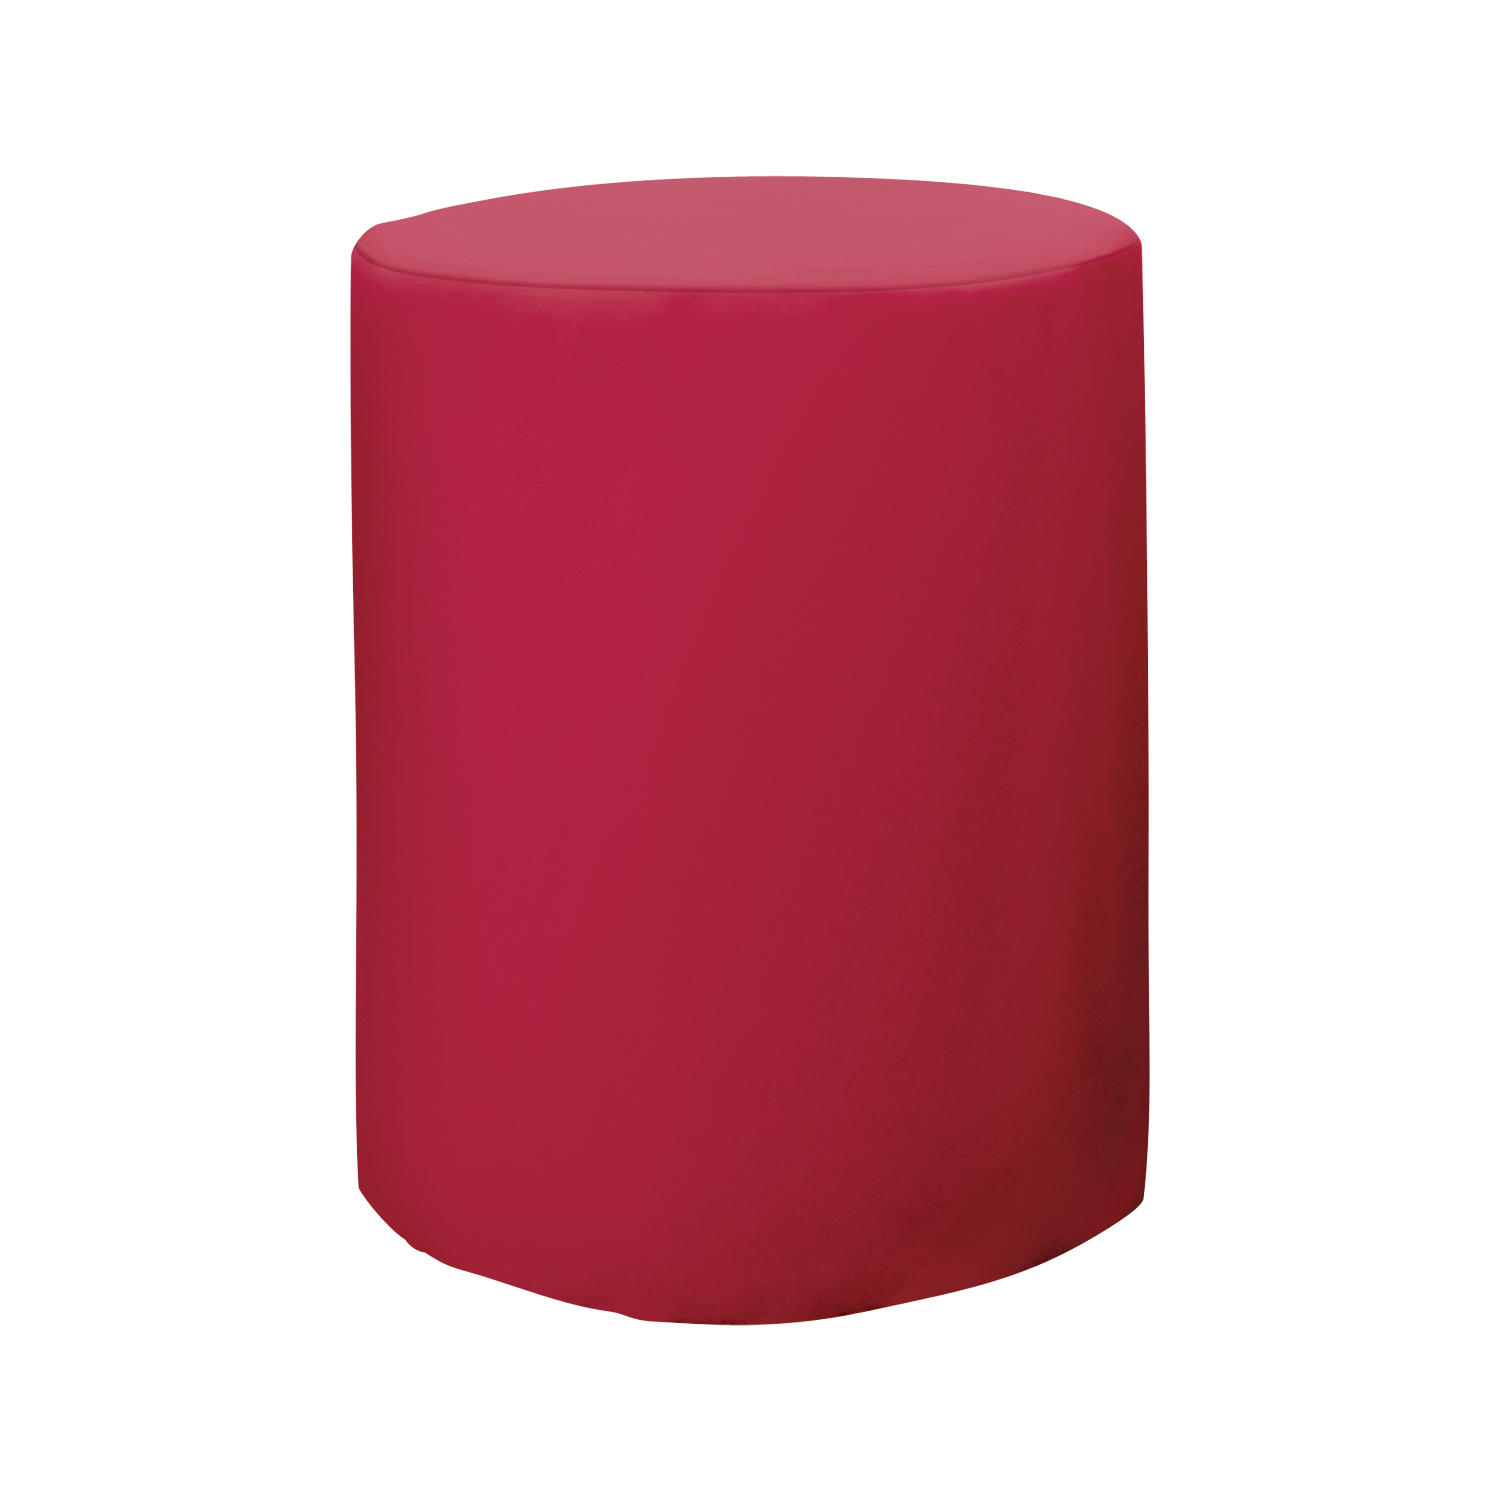 31-5-bar-height-fitted-round-table-throw-unimprintedred